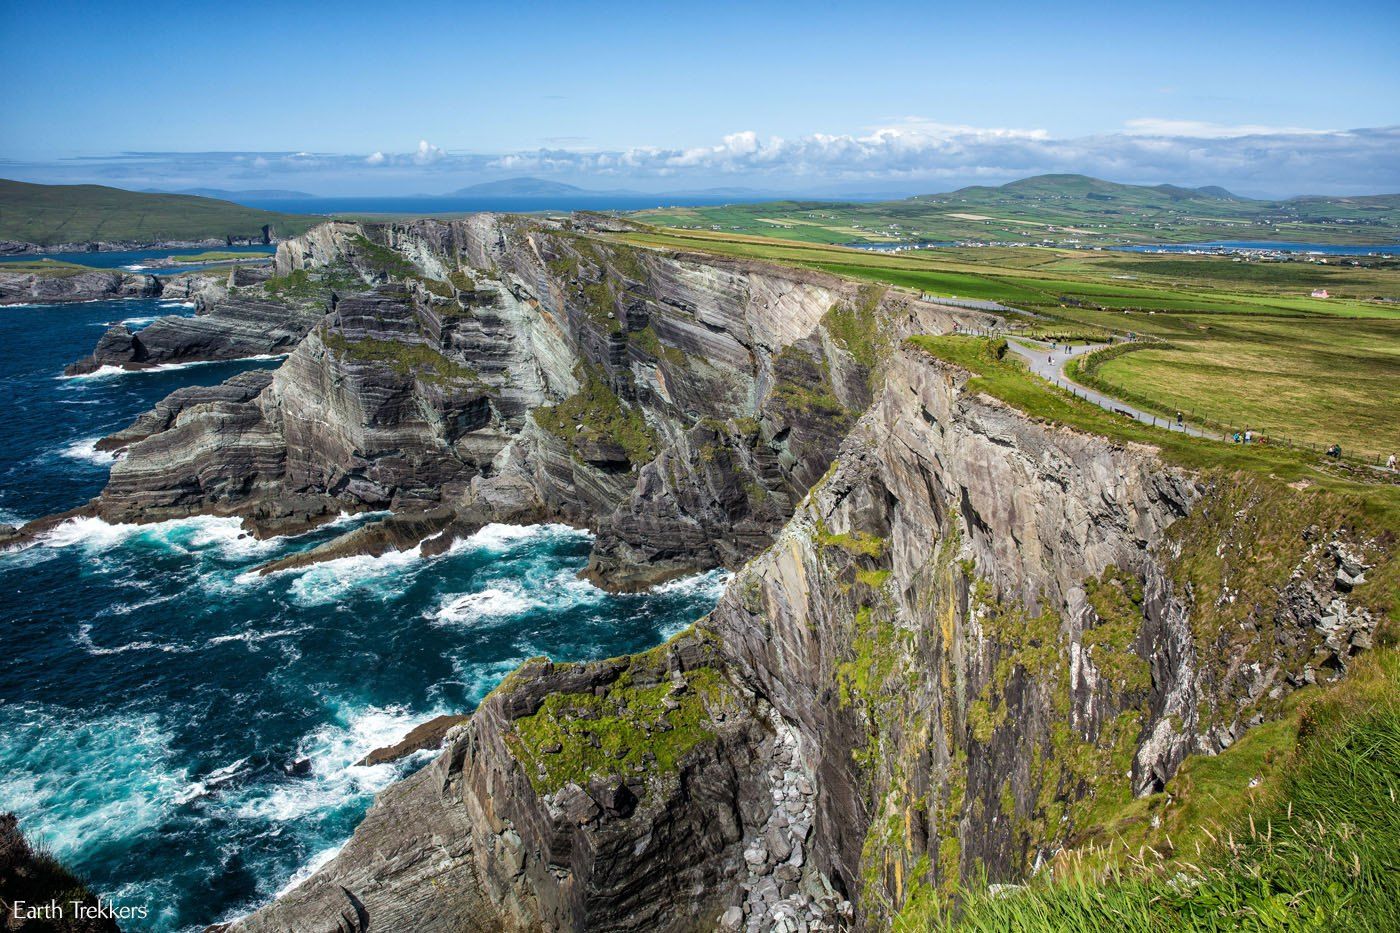 2-Day Cork, Blarney Castle and Ring of Kerry Rail Trip from Dublin - Tinggly